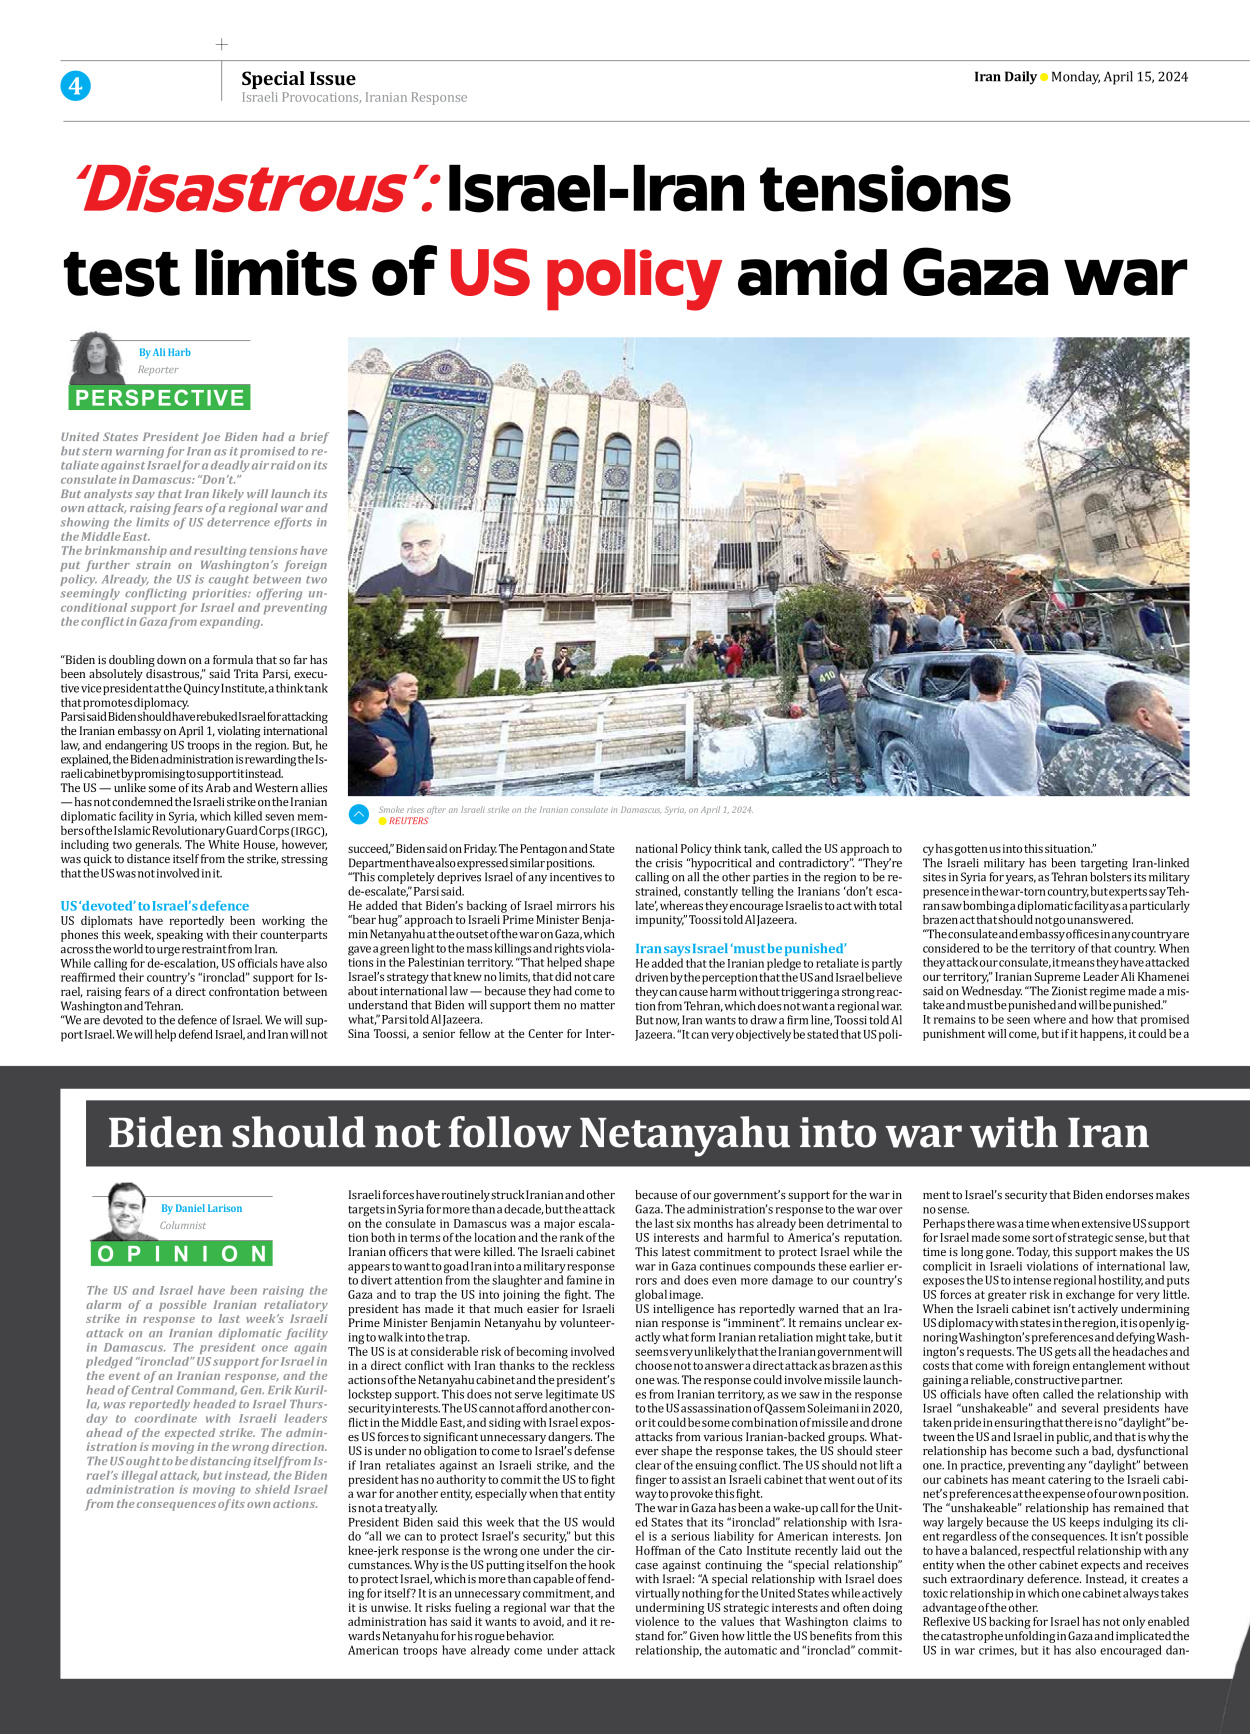 Iran Daily - Number Seven Thousand Five Hundred and Thirty Three - 15 April 2024 - Page 4